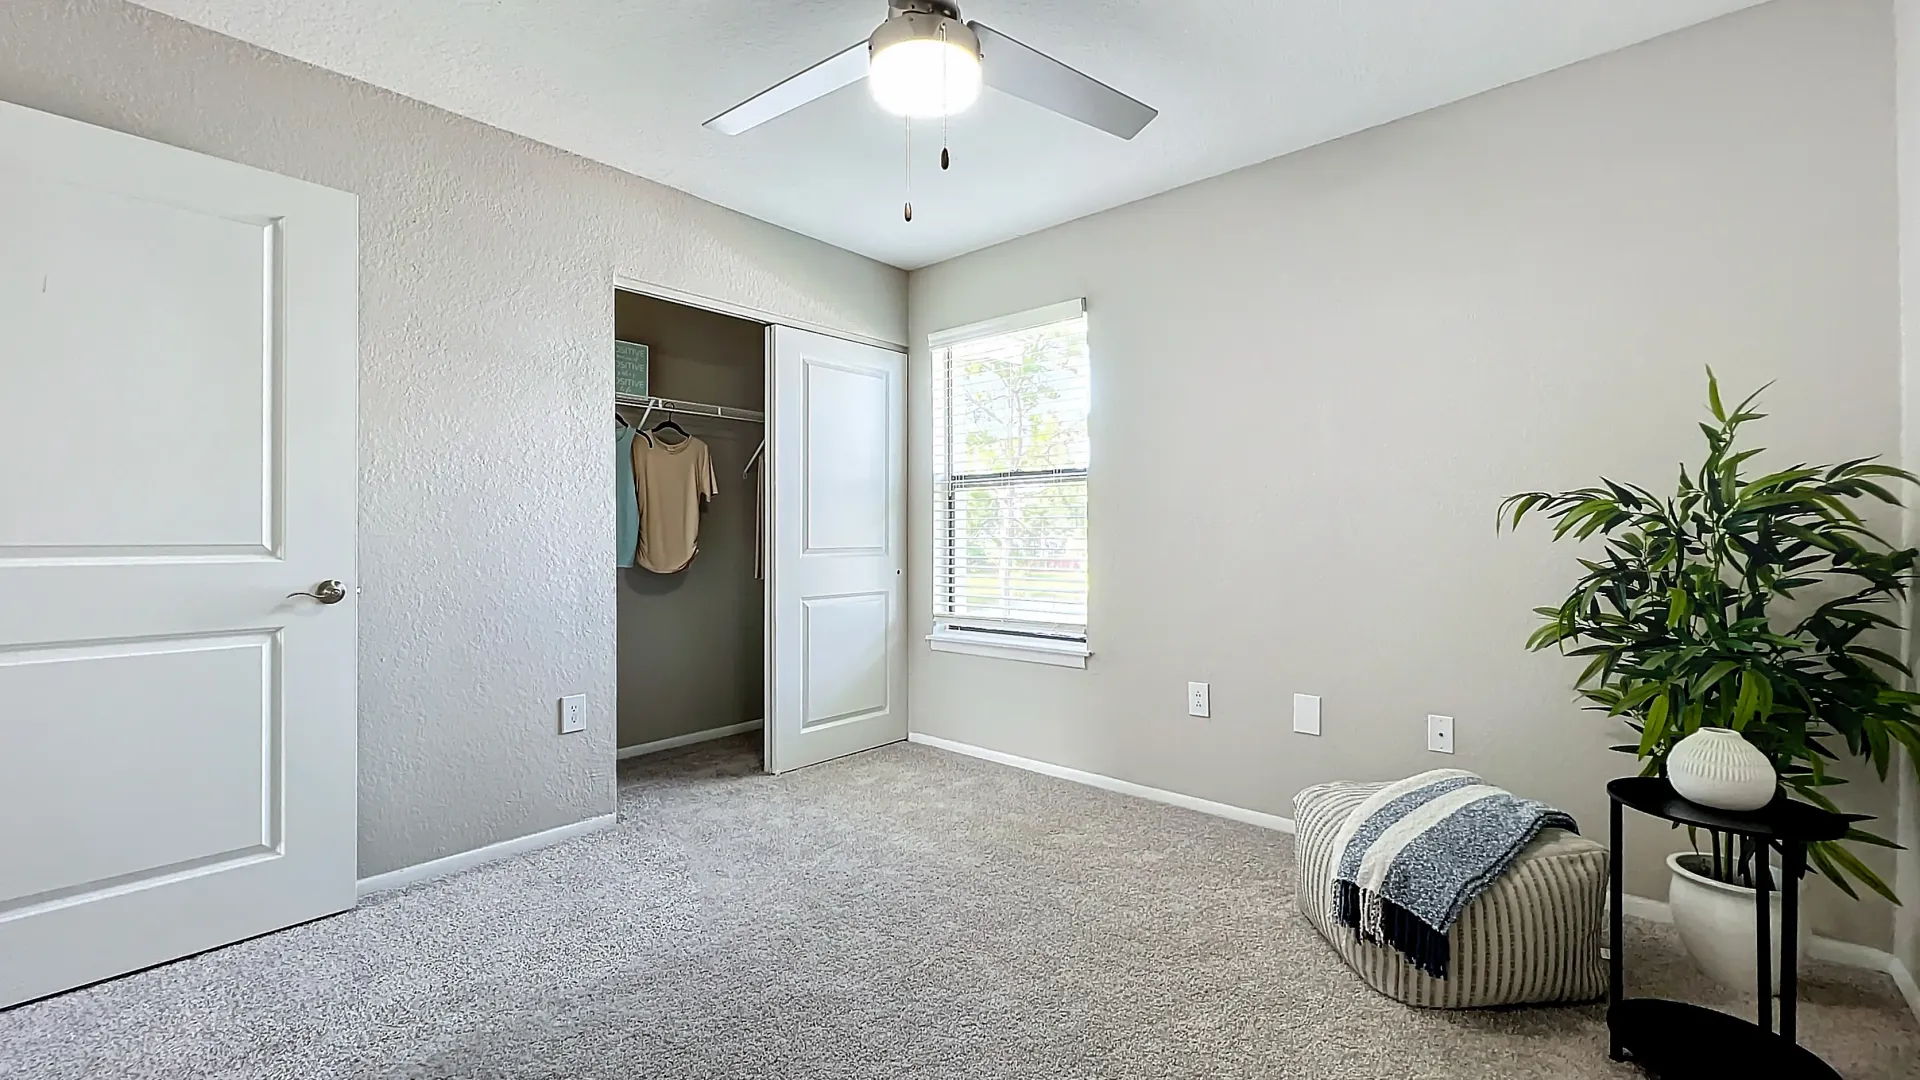 Spacious bedroom with plush carpeting, a large window, a ceiling fan, and an open closet.